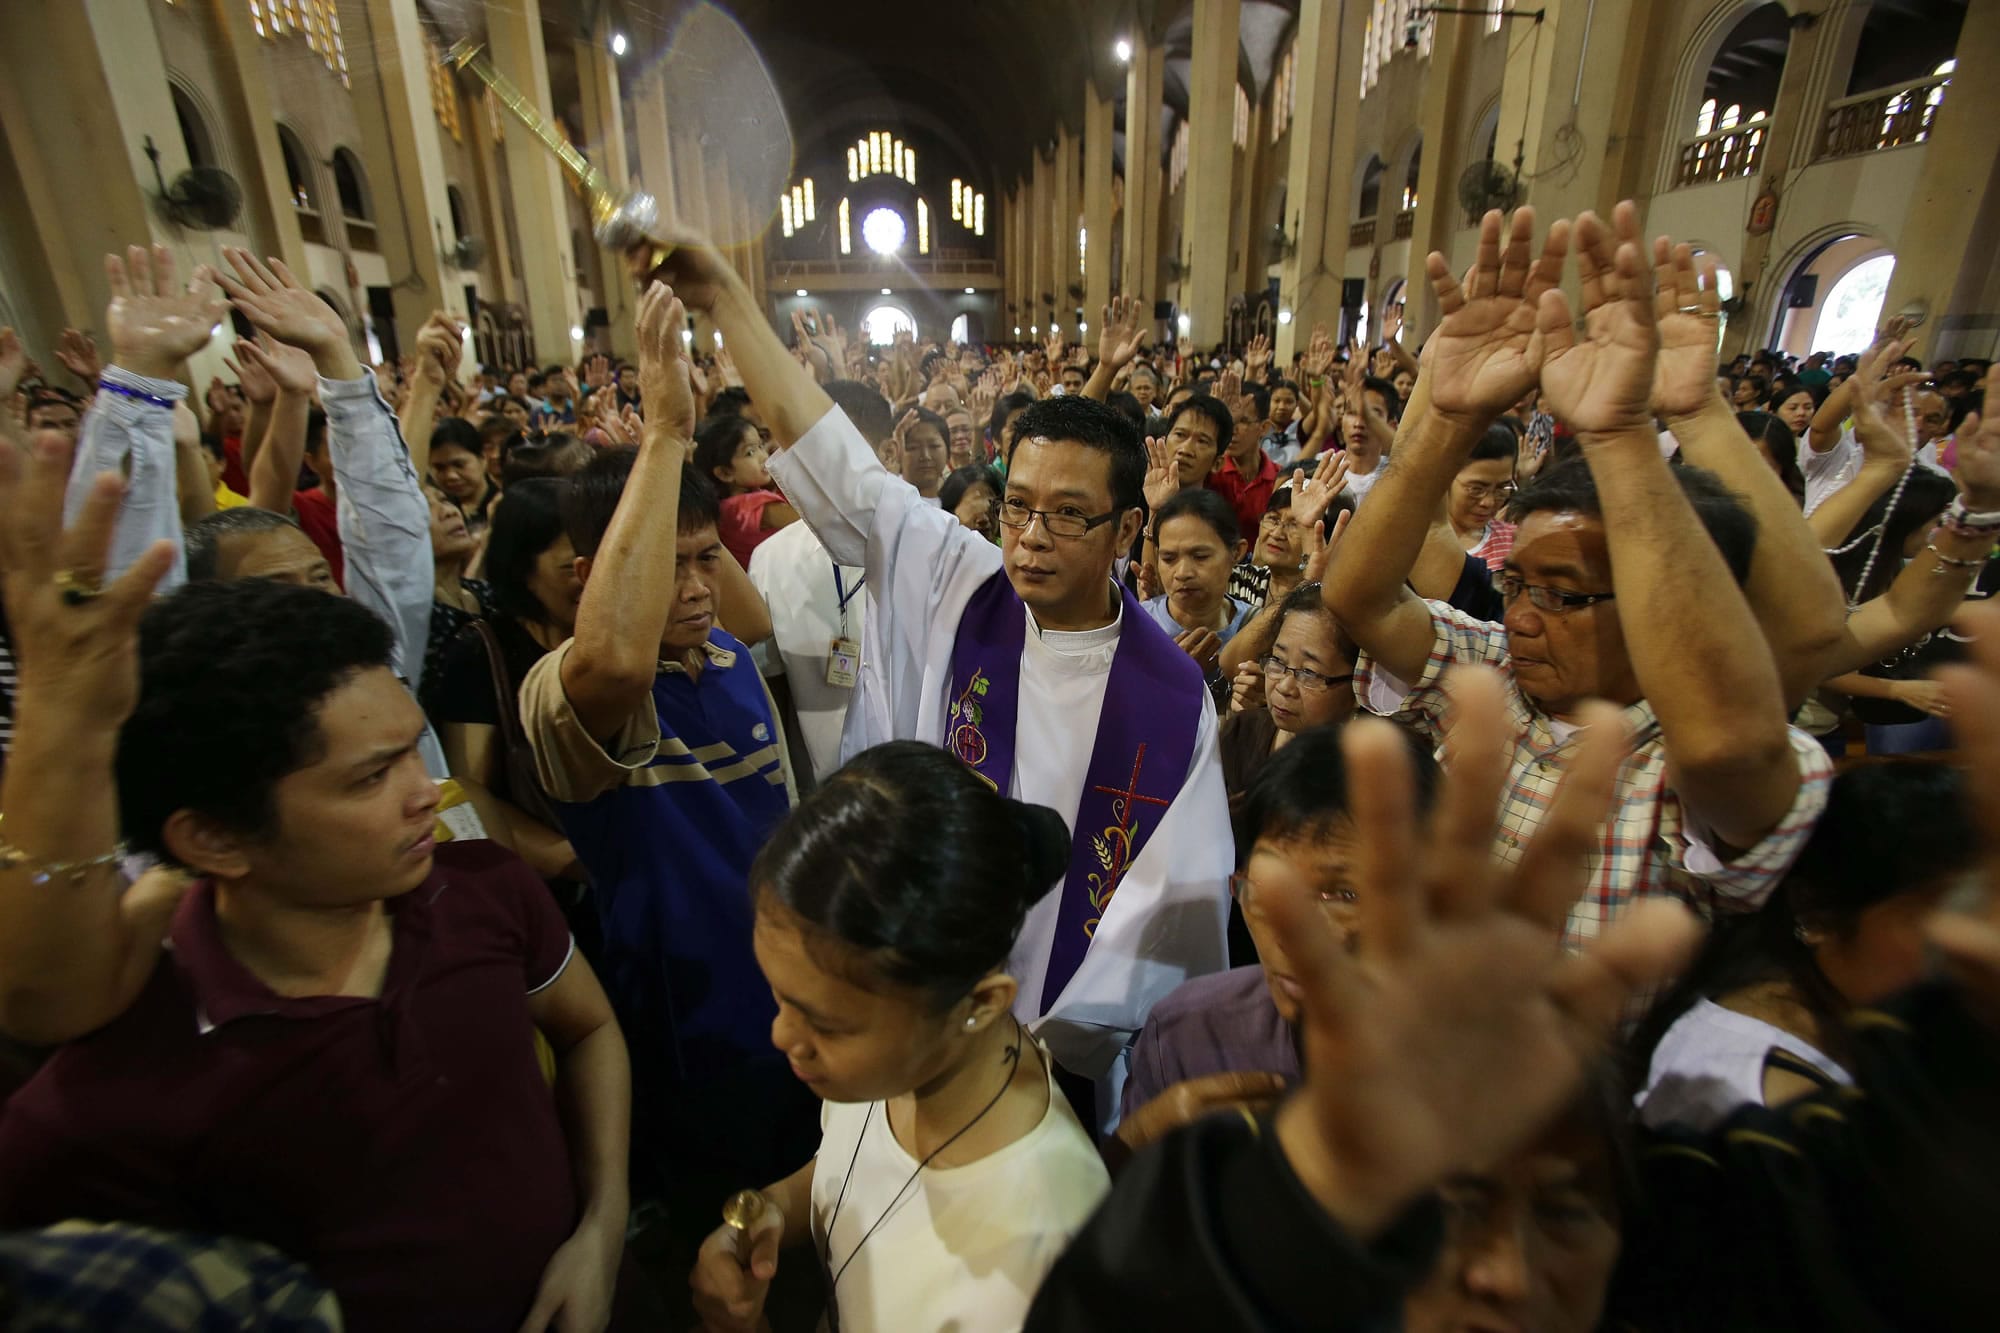 Filipino Catholic Priest Victorino Cueto, center, sprinkles holy water on devotees during a mass Sunday at the Shrine of Our Lady of Perpetual Help in suburban Paranaque, south of Manila, Philippines.